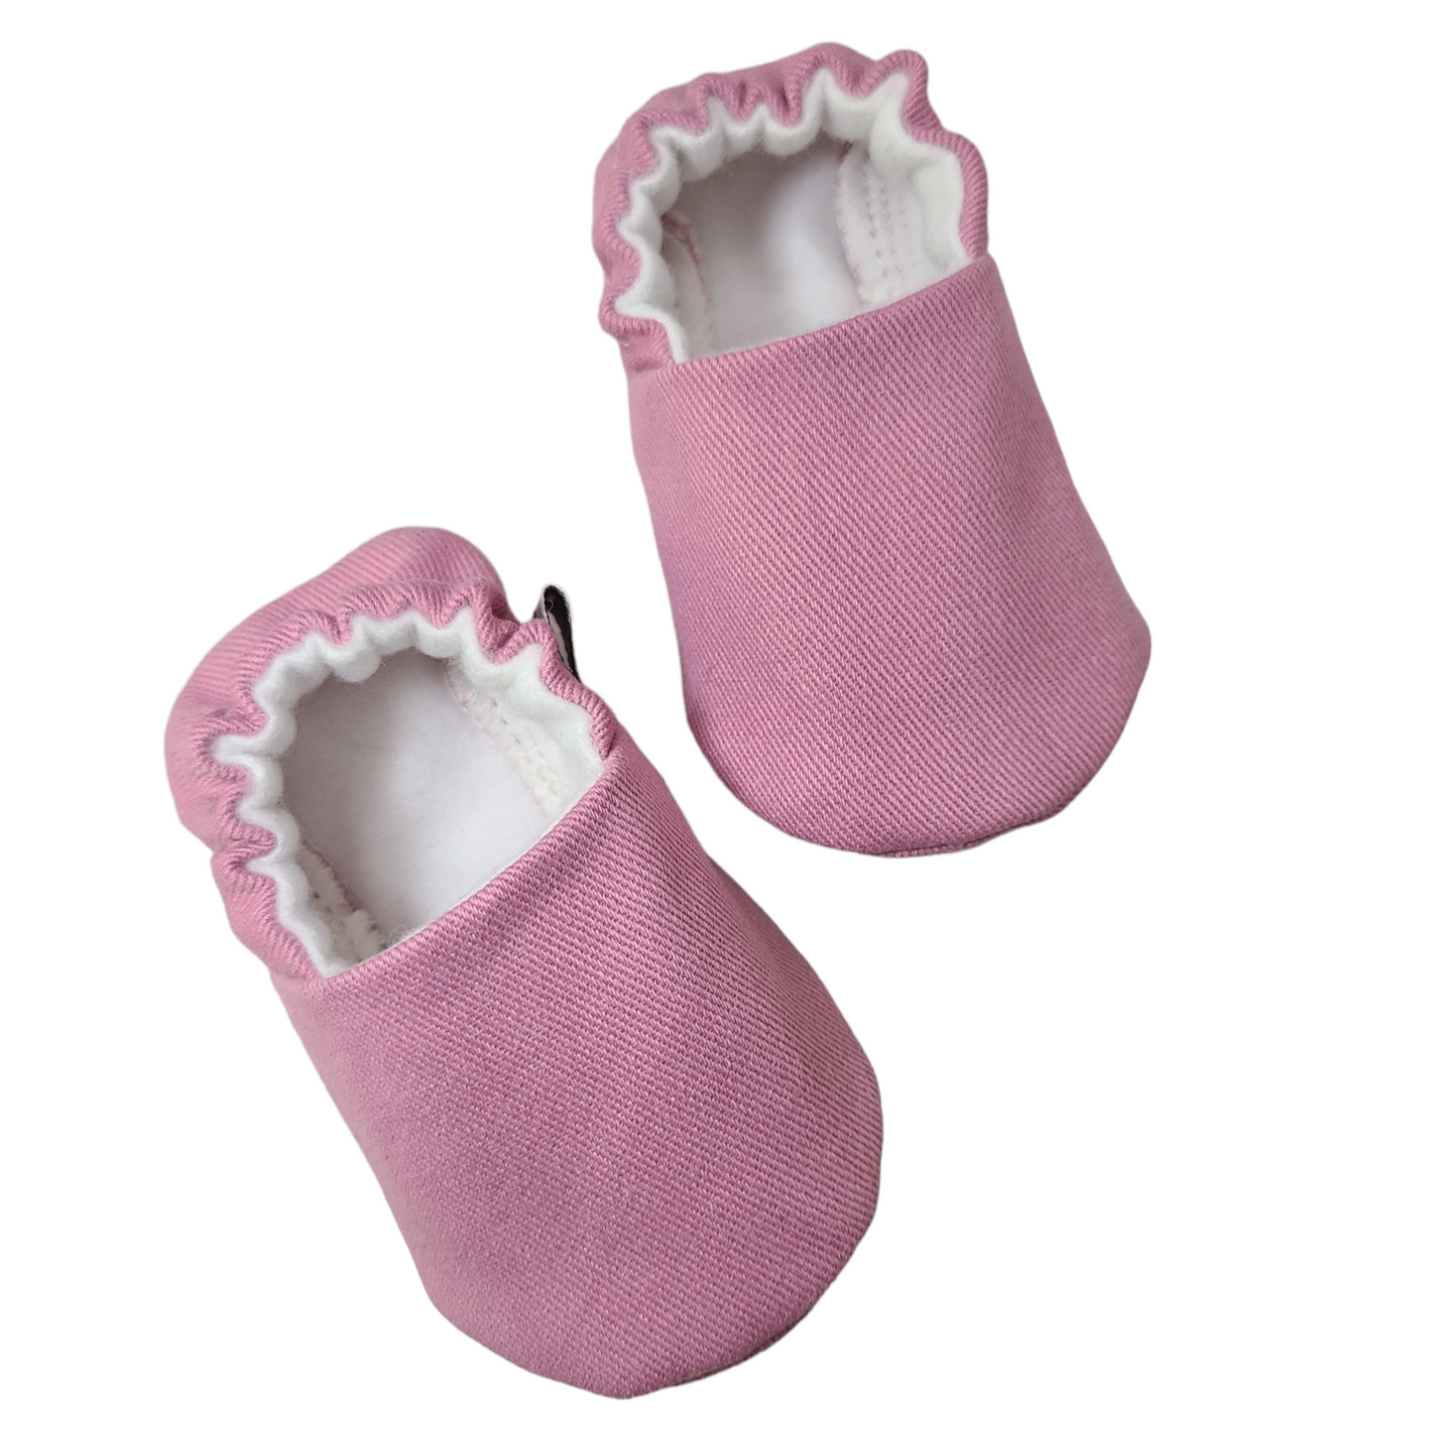 Pink Baby Girl Shoes, Pink Baby Gift, Baby Slippers, pink Baby Shoes, Baby Mocc, Baby Shoes, Newborn Slippers, Baby Girl Slippers, toddler slippers